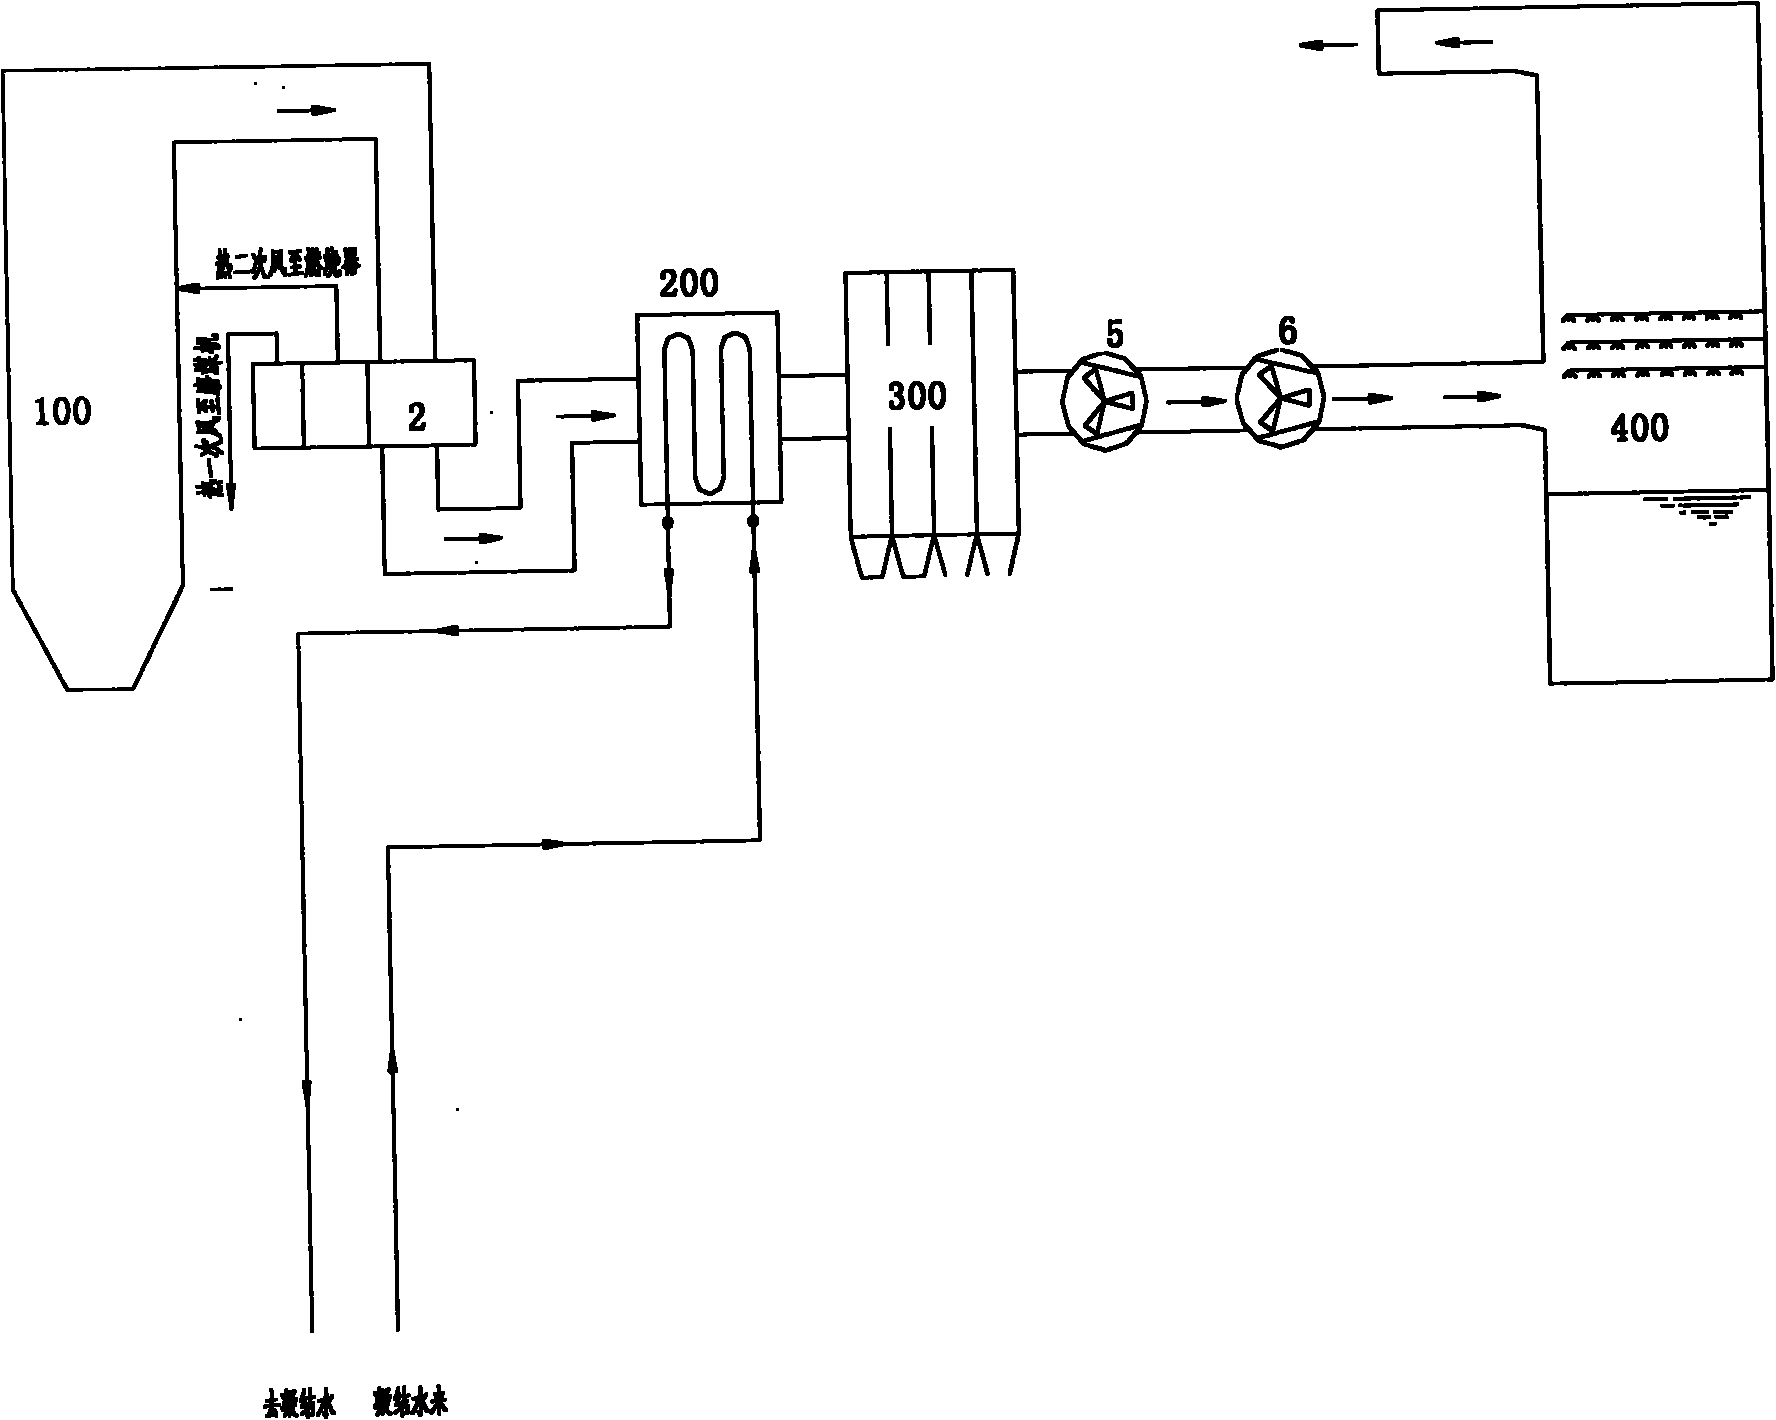 Two-stage smoke-gas-air heat-exchanger system applied to thermal power plant